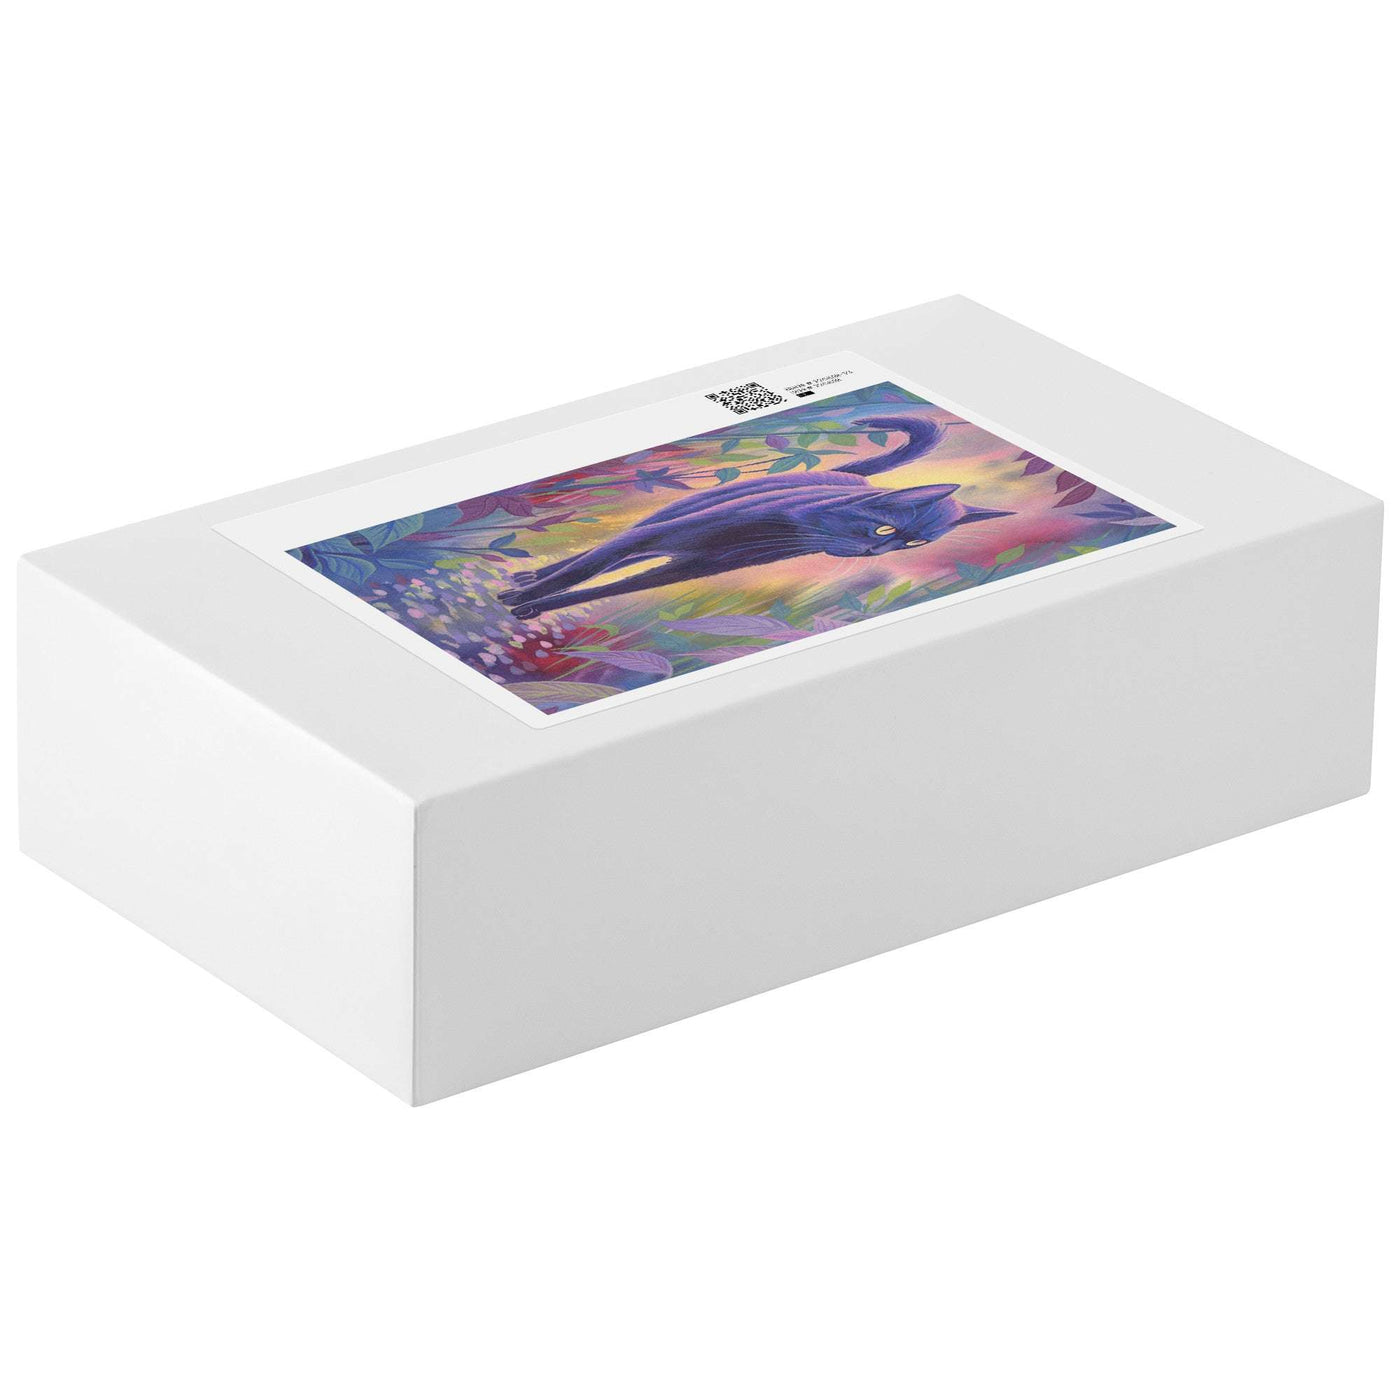 White box containing a cat puzzle with a colorful black cat painting on top.